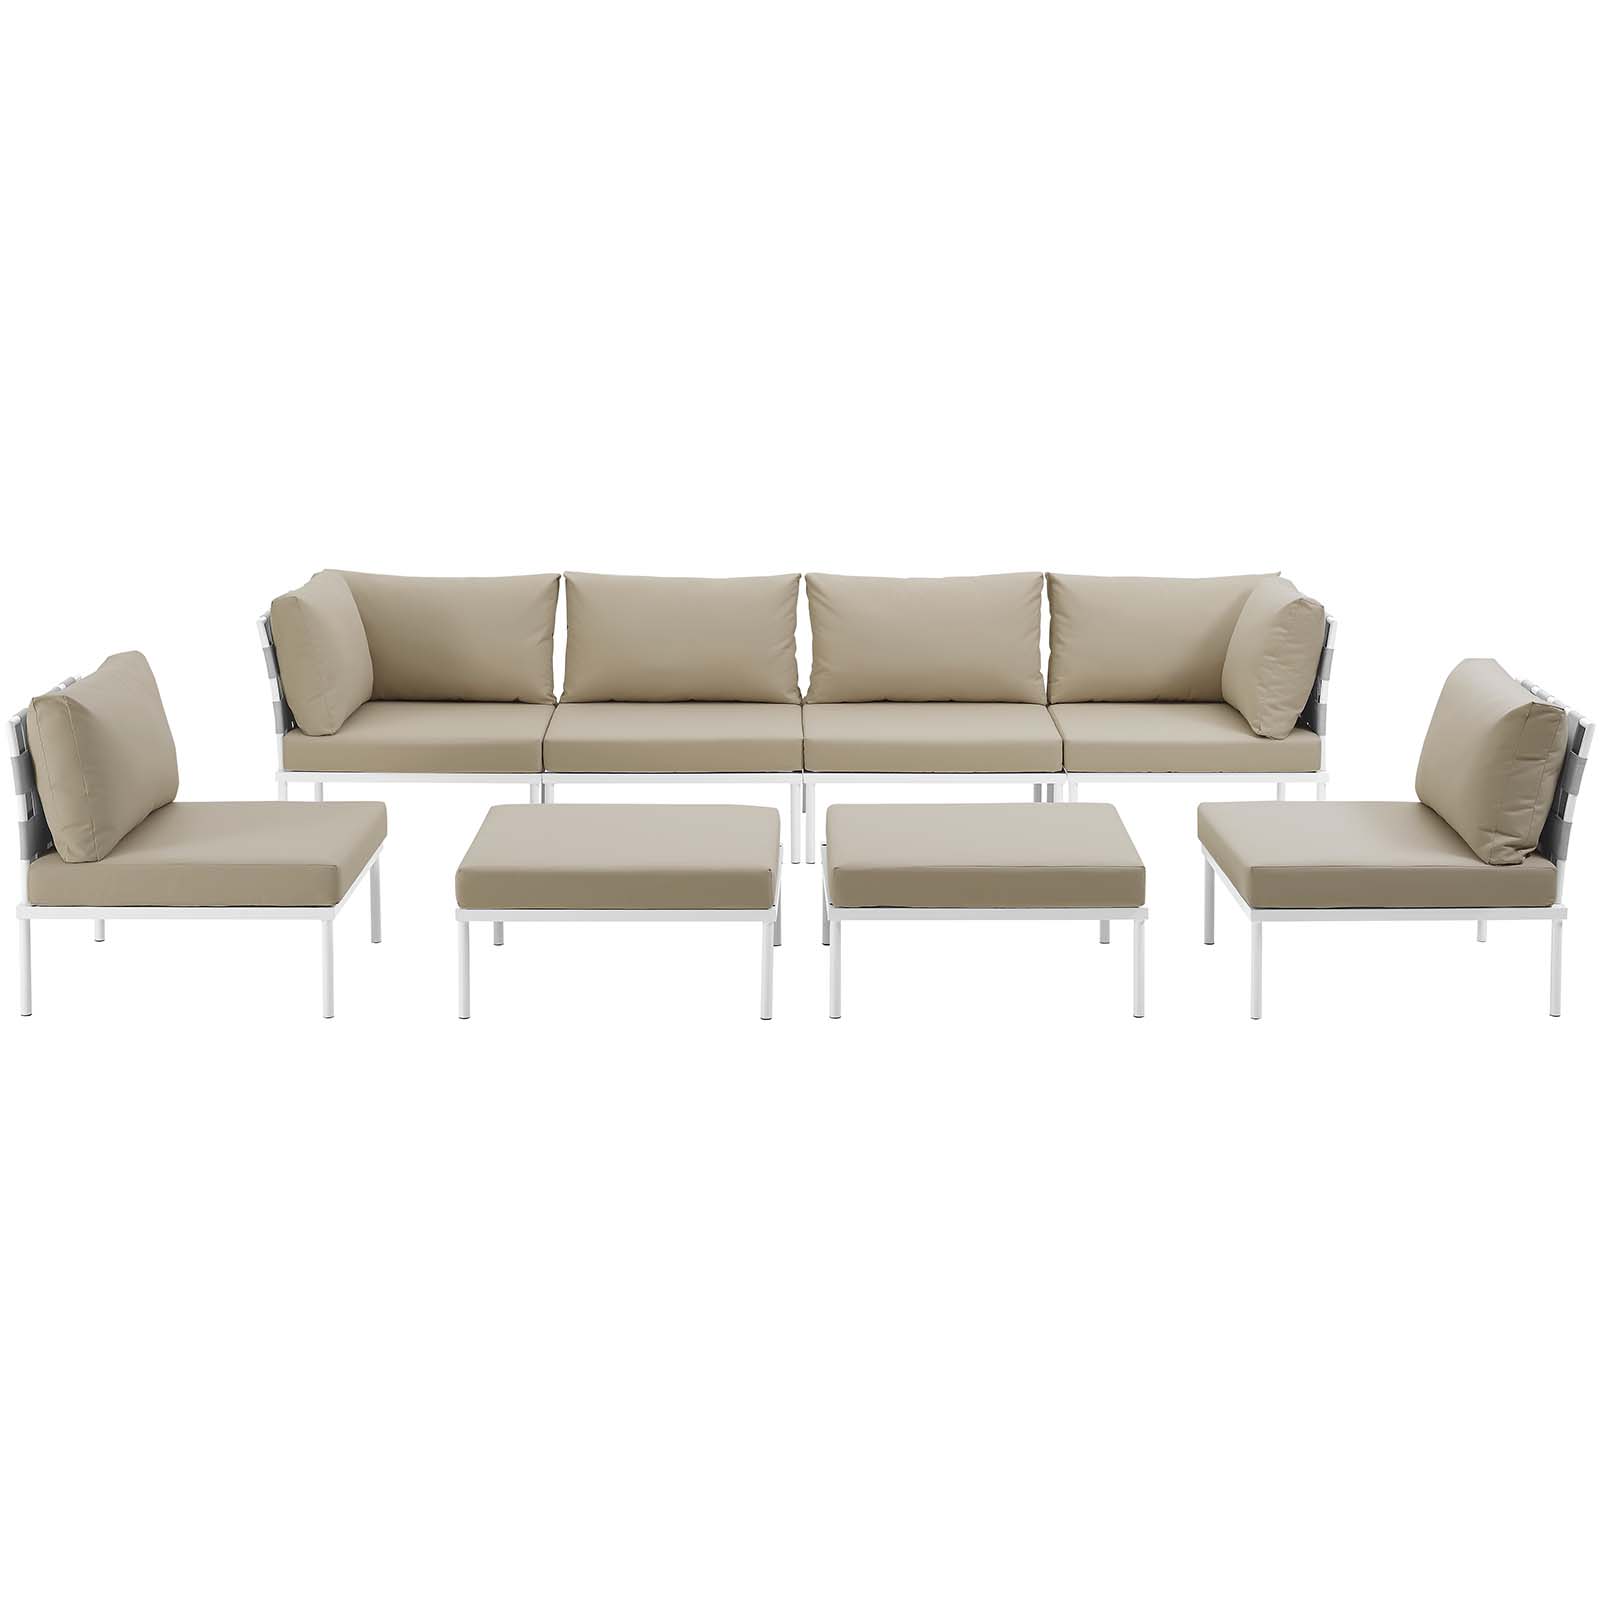 Modway Harmony 8 Piece Outdoor Patio Aluminum Sectional Sofa Set in White Beige - image 4 of 7